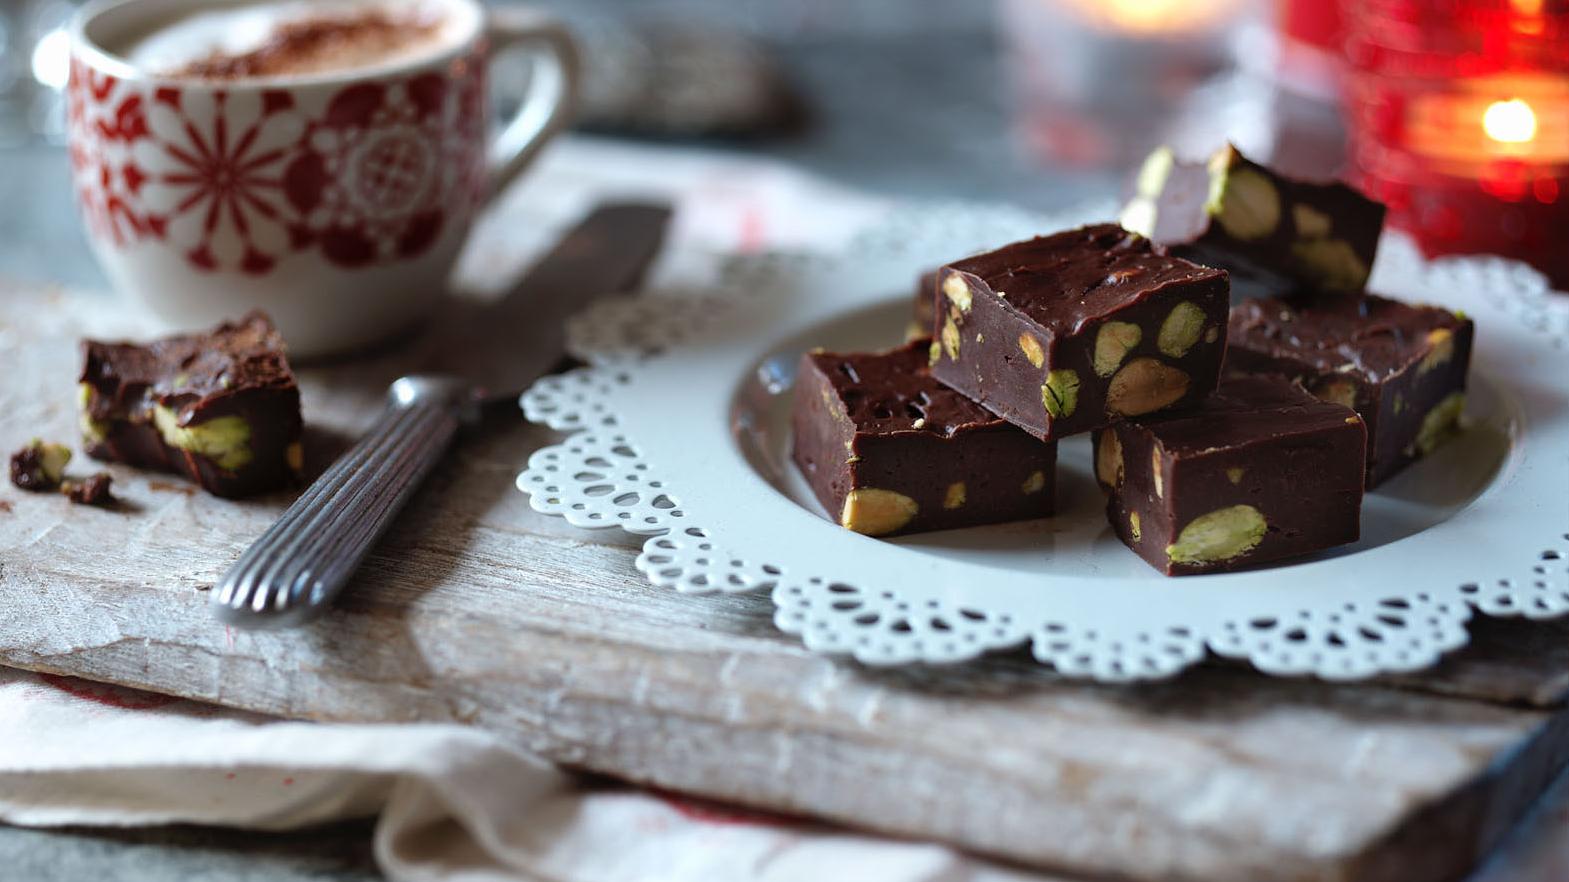  Perfect for gifts or just a sweet treat, this chocolate pistachio fudge is sure to impress.